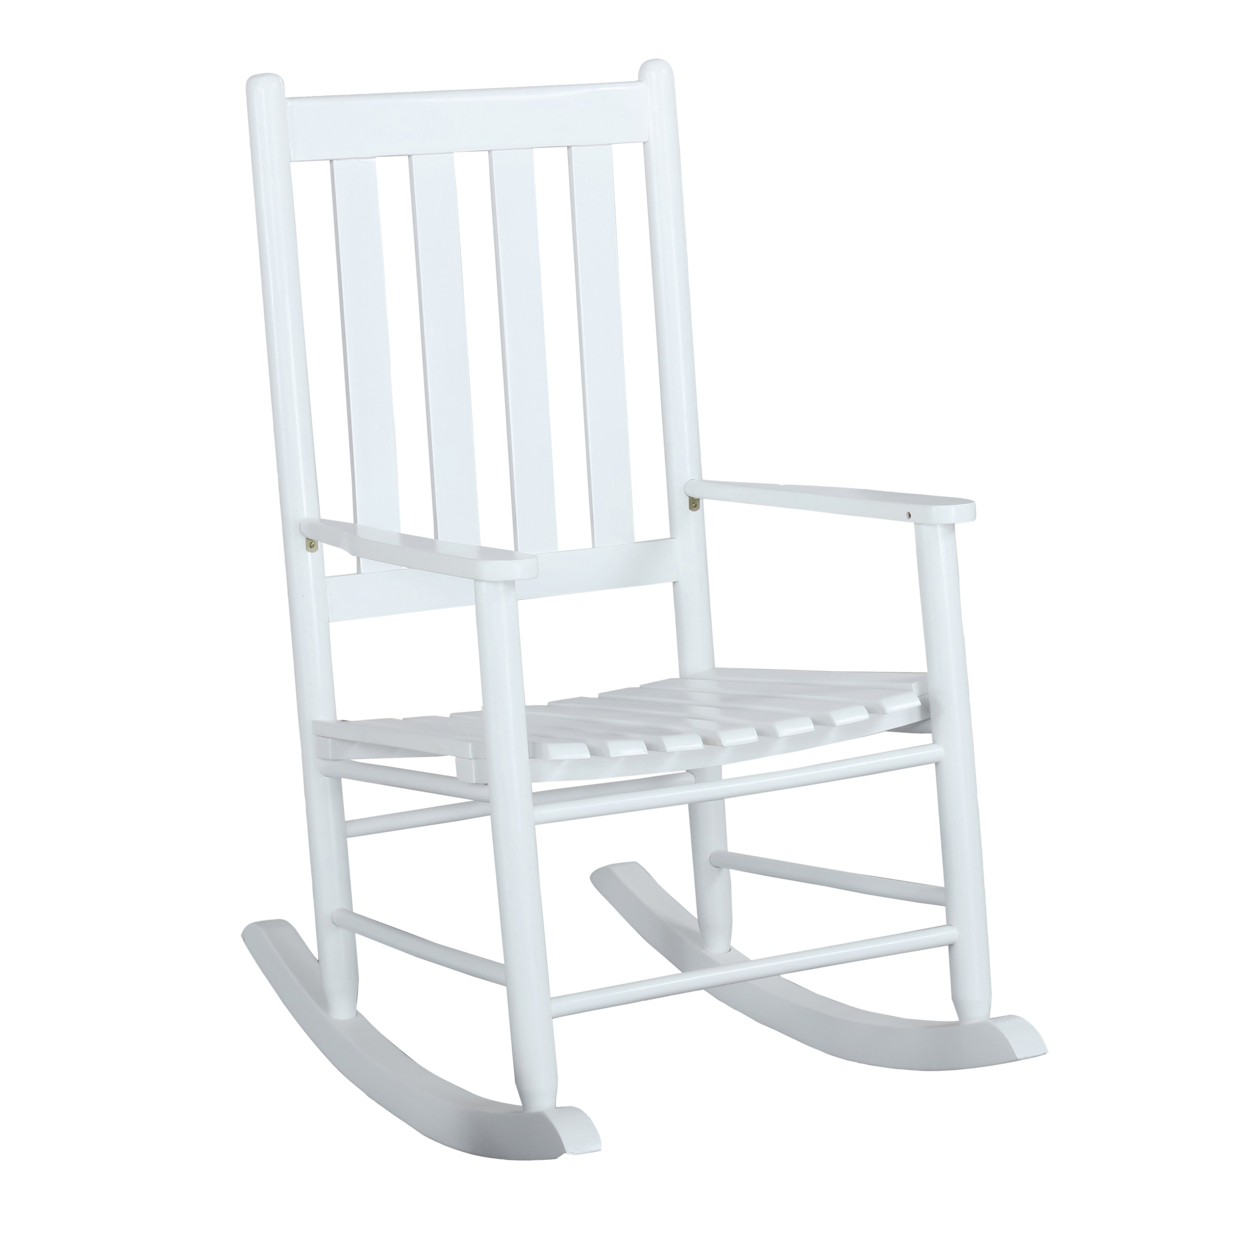 Wooden Rocking Chair With Slat Back And Mission Style, White- Saltoro Sherpi